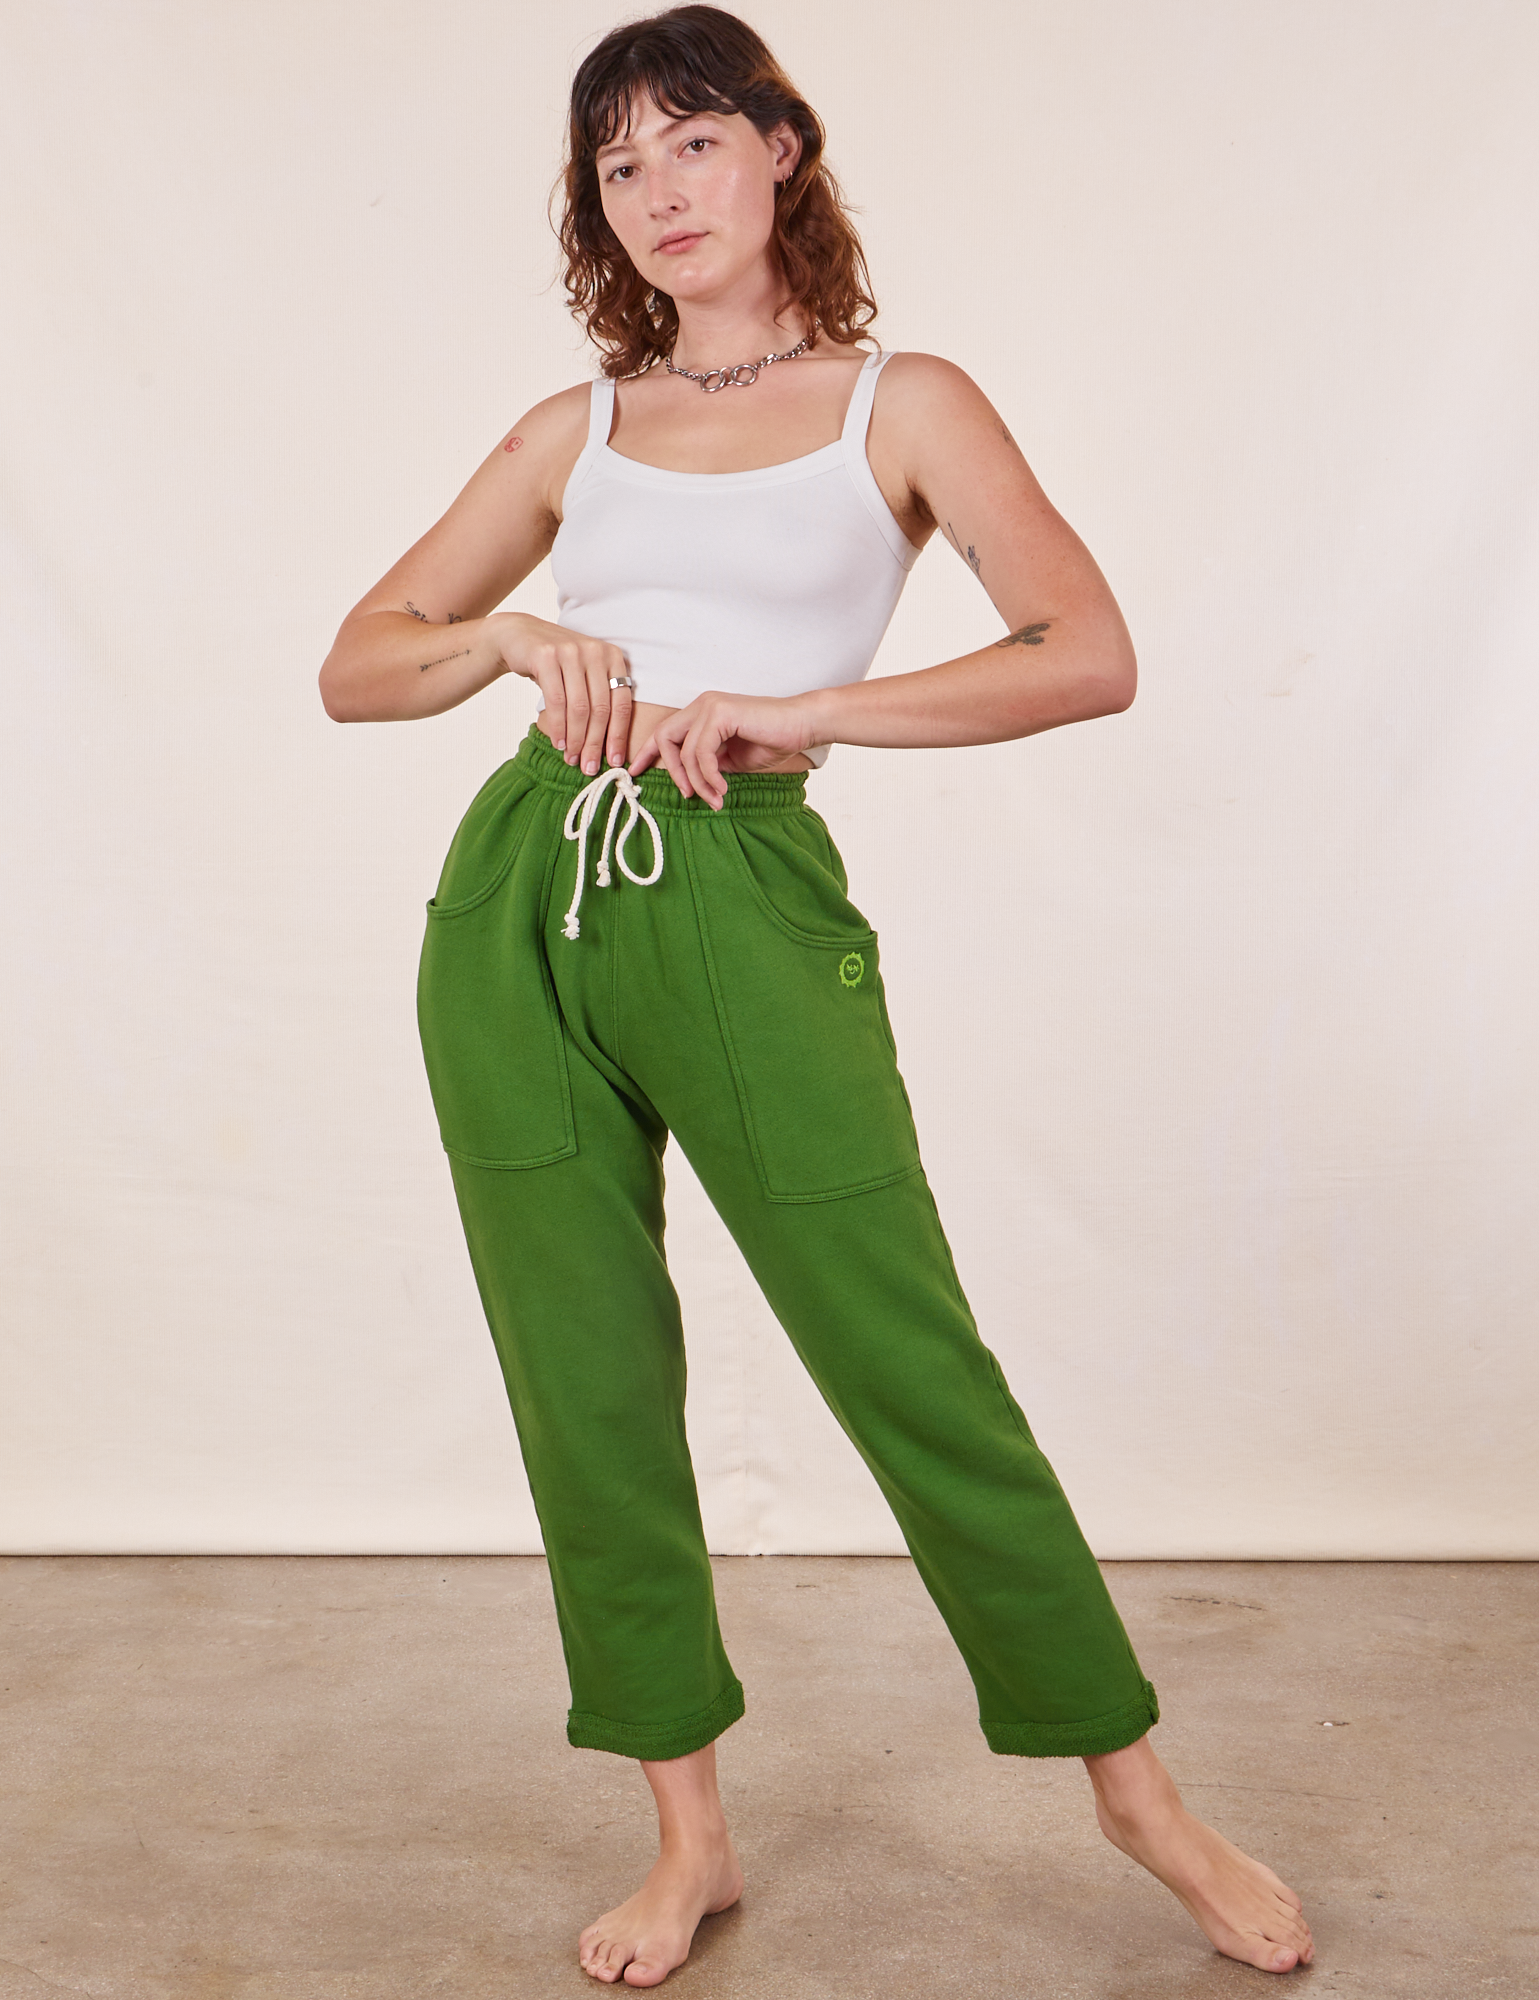 Alex is 5&#39;8&quot; and wearing XXS Cropped Rolled Cuff Sweatpants in Lawn Green paired with vintage off-white Cami